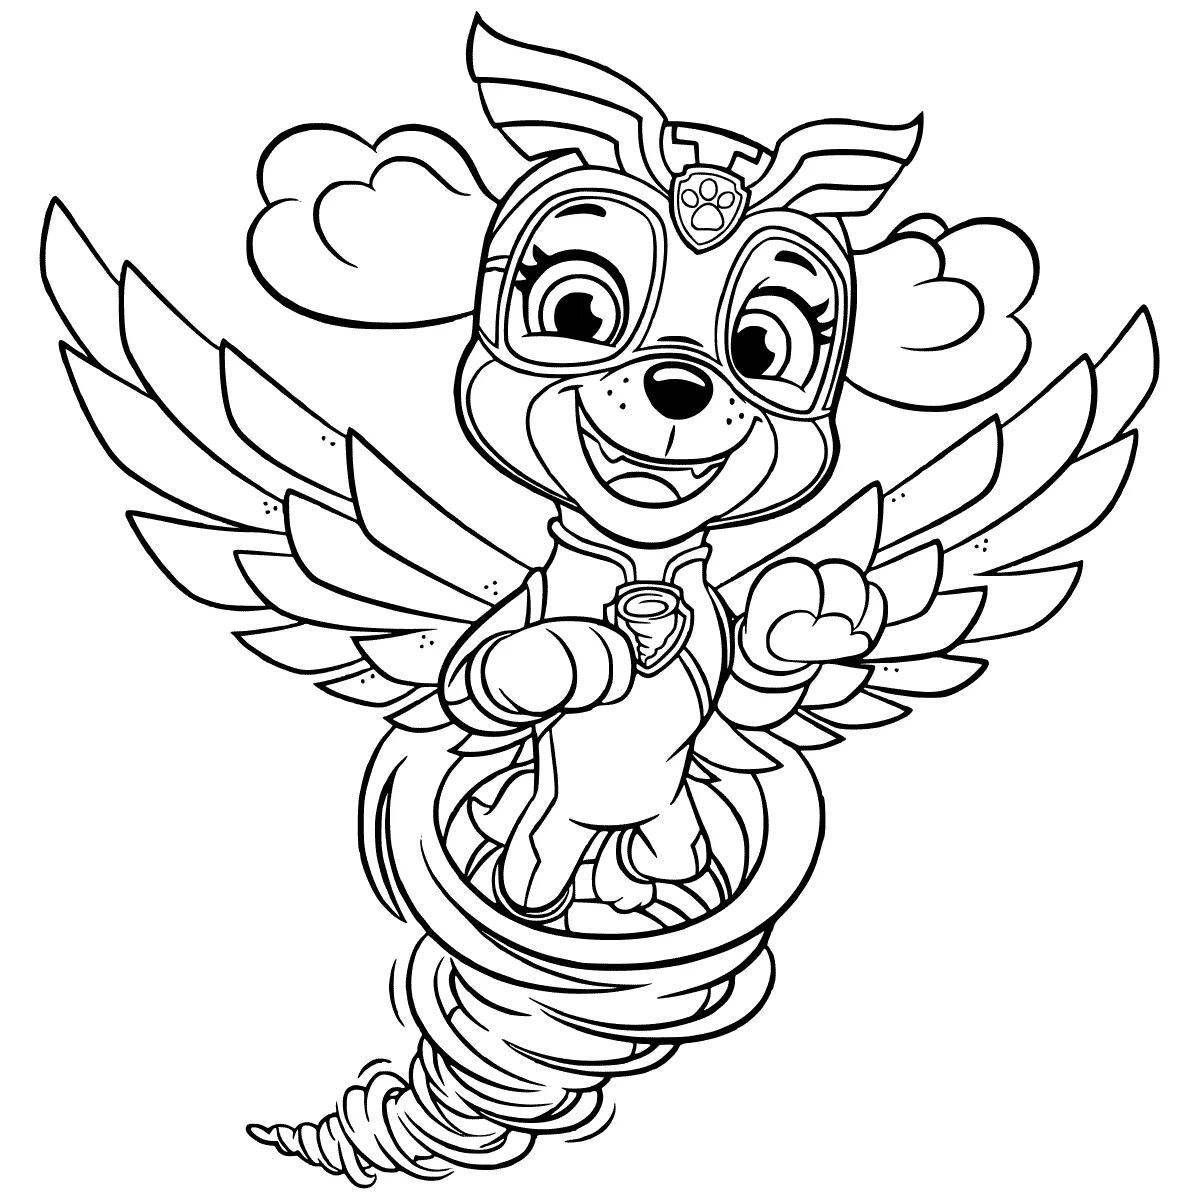 Herochiki gloria amazing coloring pages